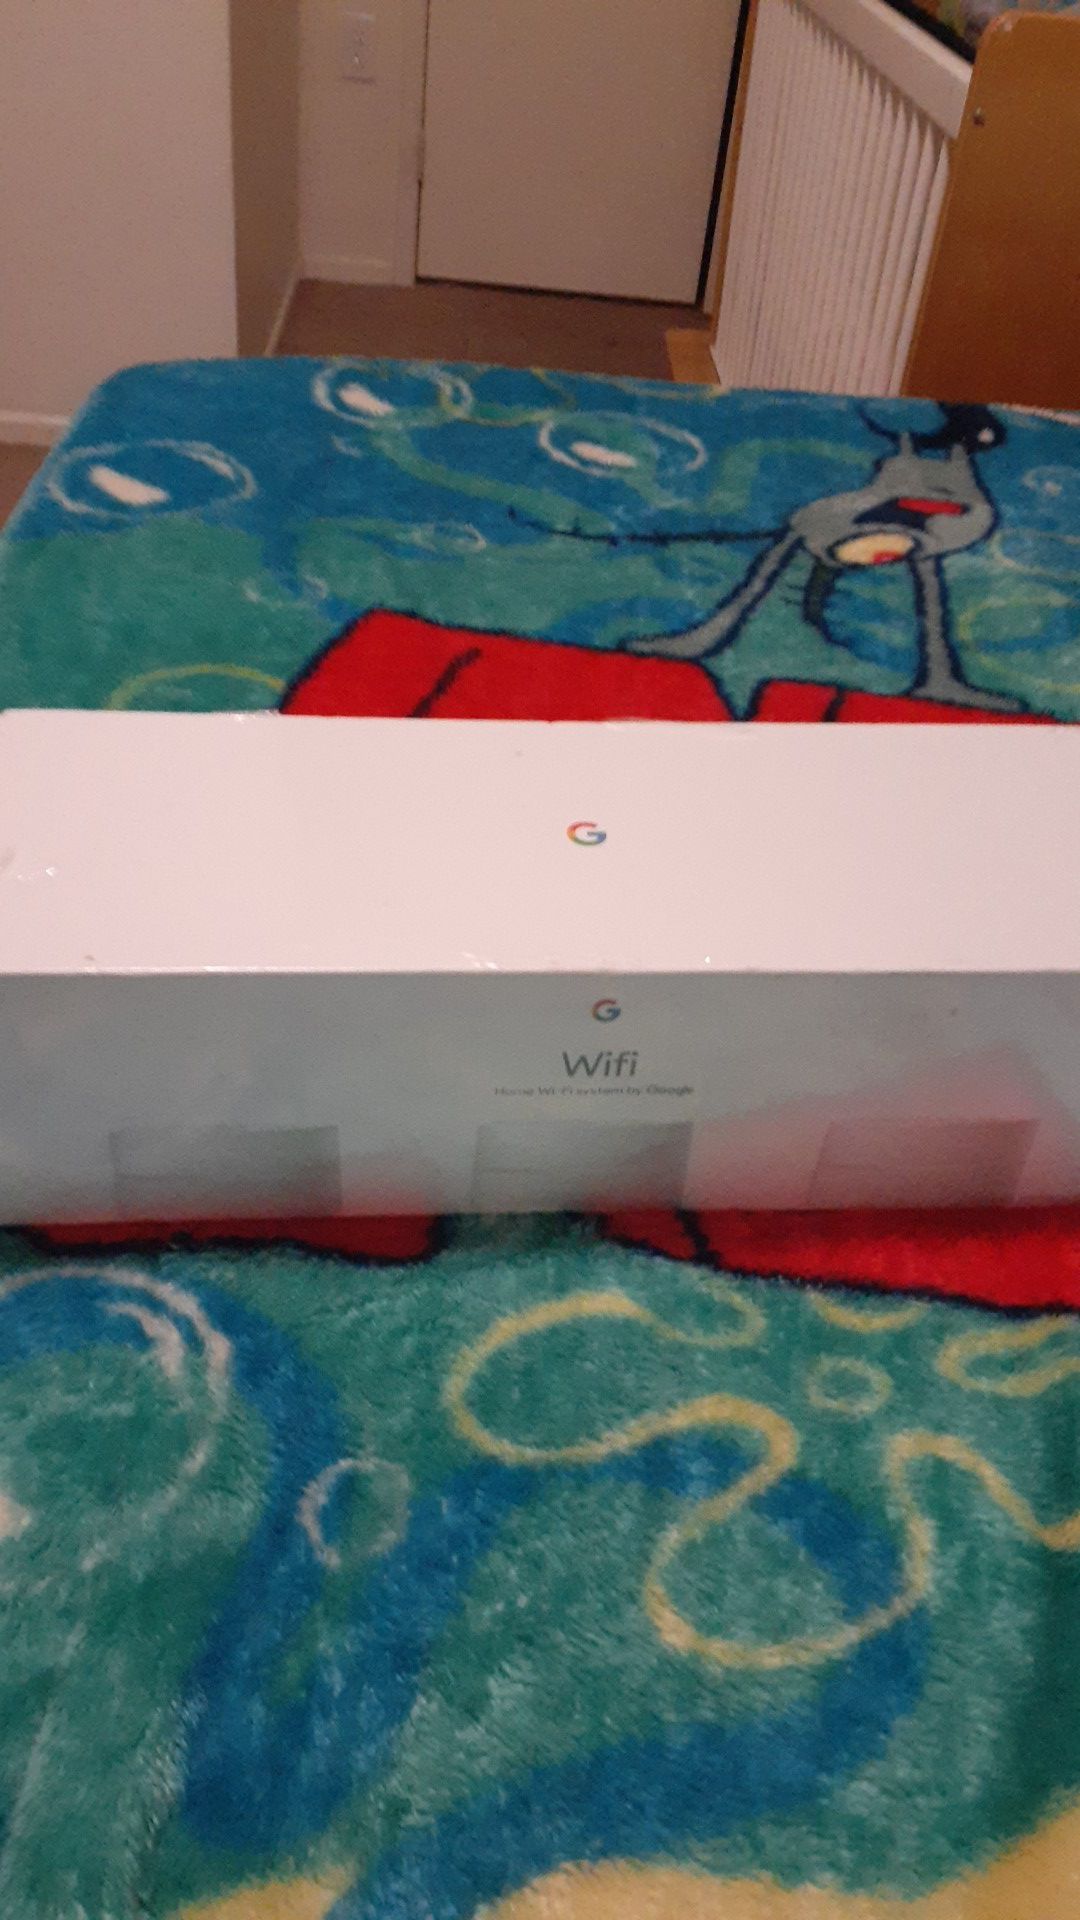 Home wifi system by google